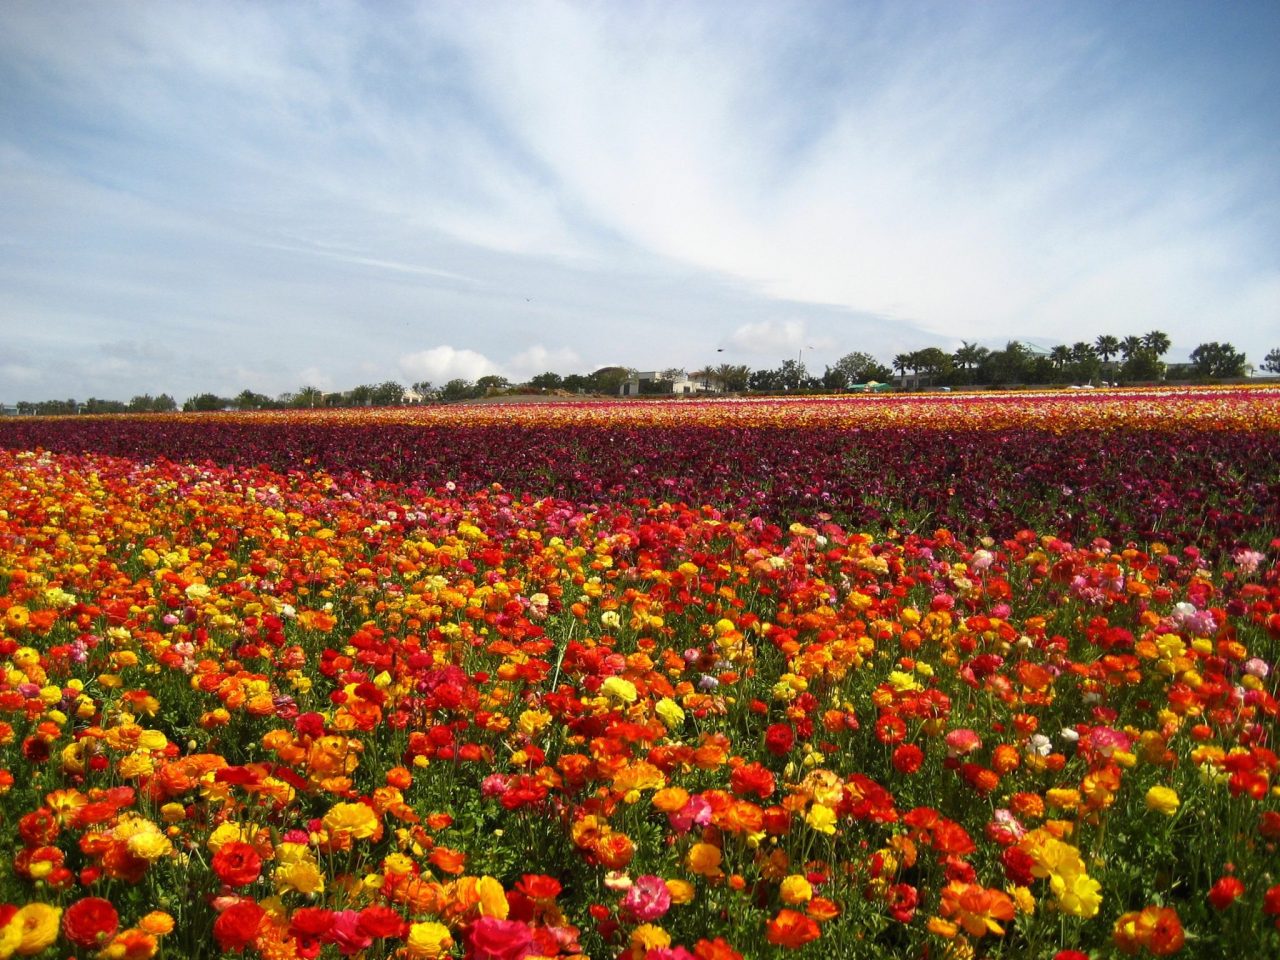 Visit The Flower Fields of Carlsbad, CA